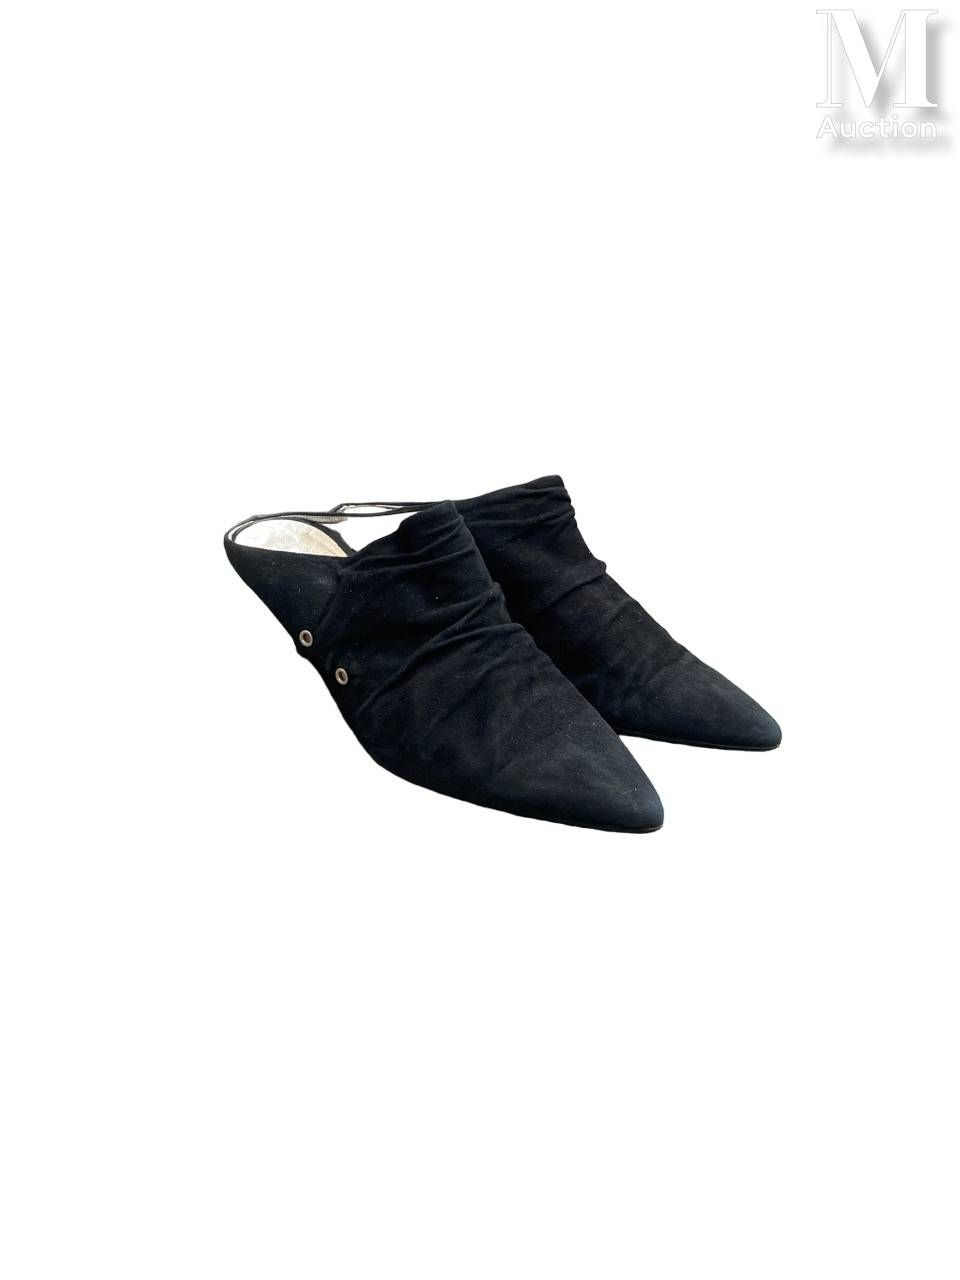 CHANTAL THOMASS - Automne-hiver 1984 Pair of mules
in black suede with draped ef&hellip;